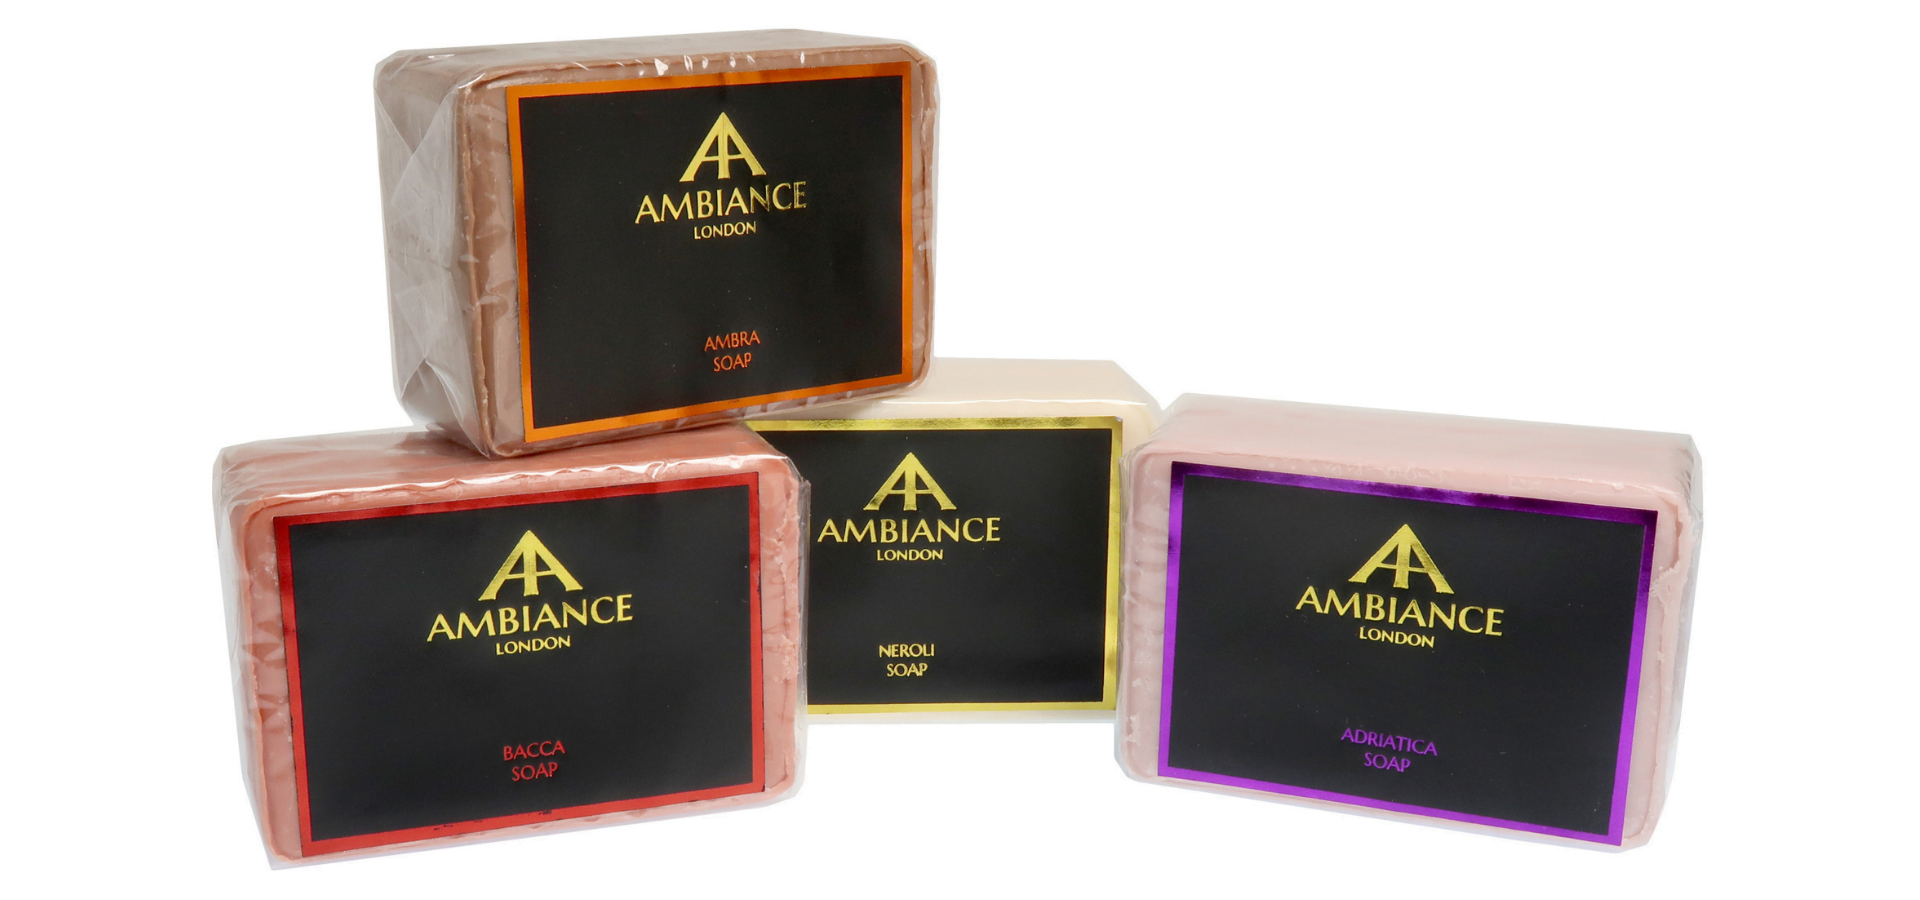 luxury soap - the best soap - the most luxurious soap - ancienne ambiance soap